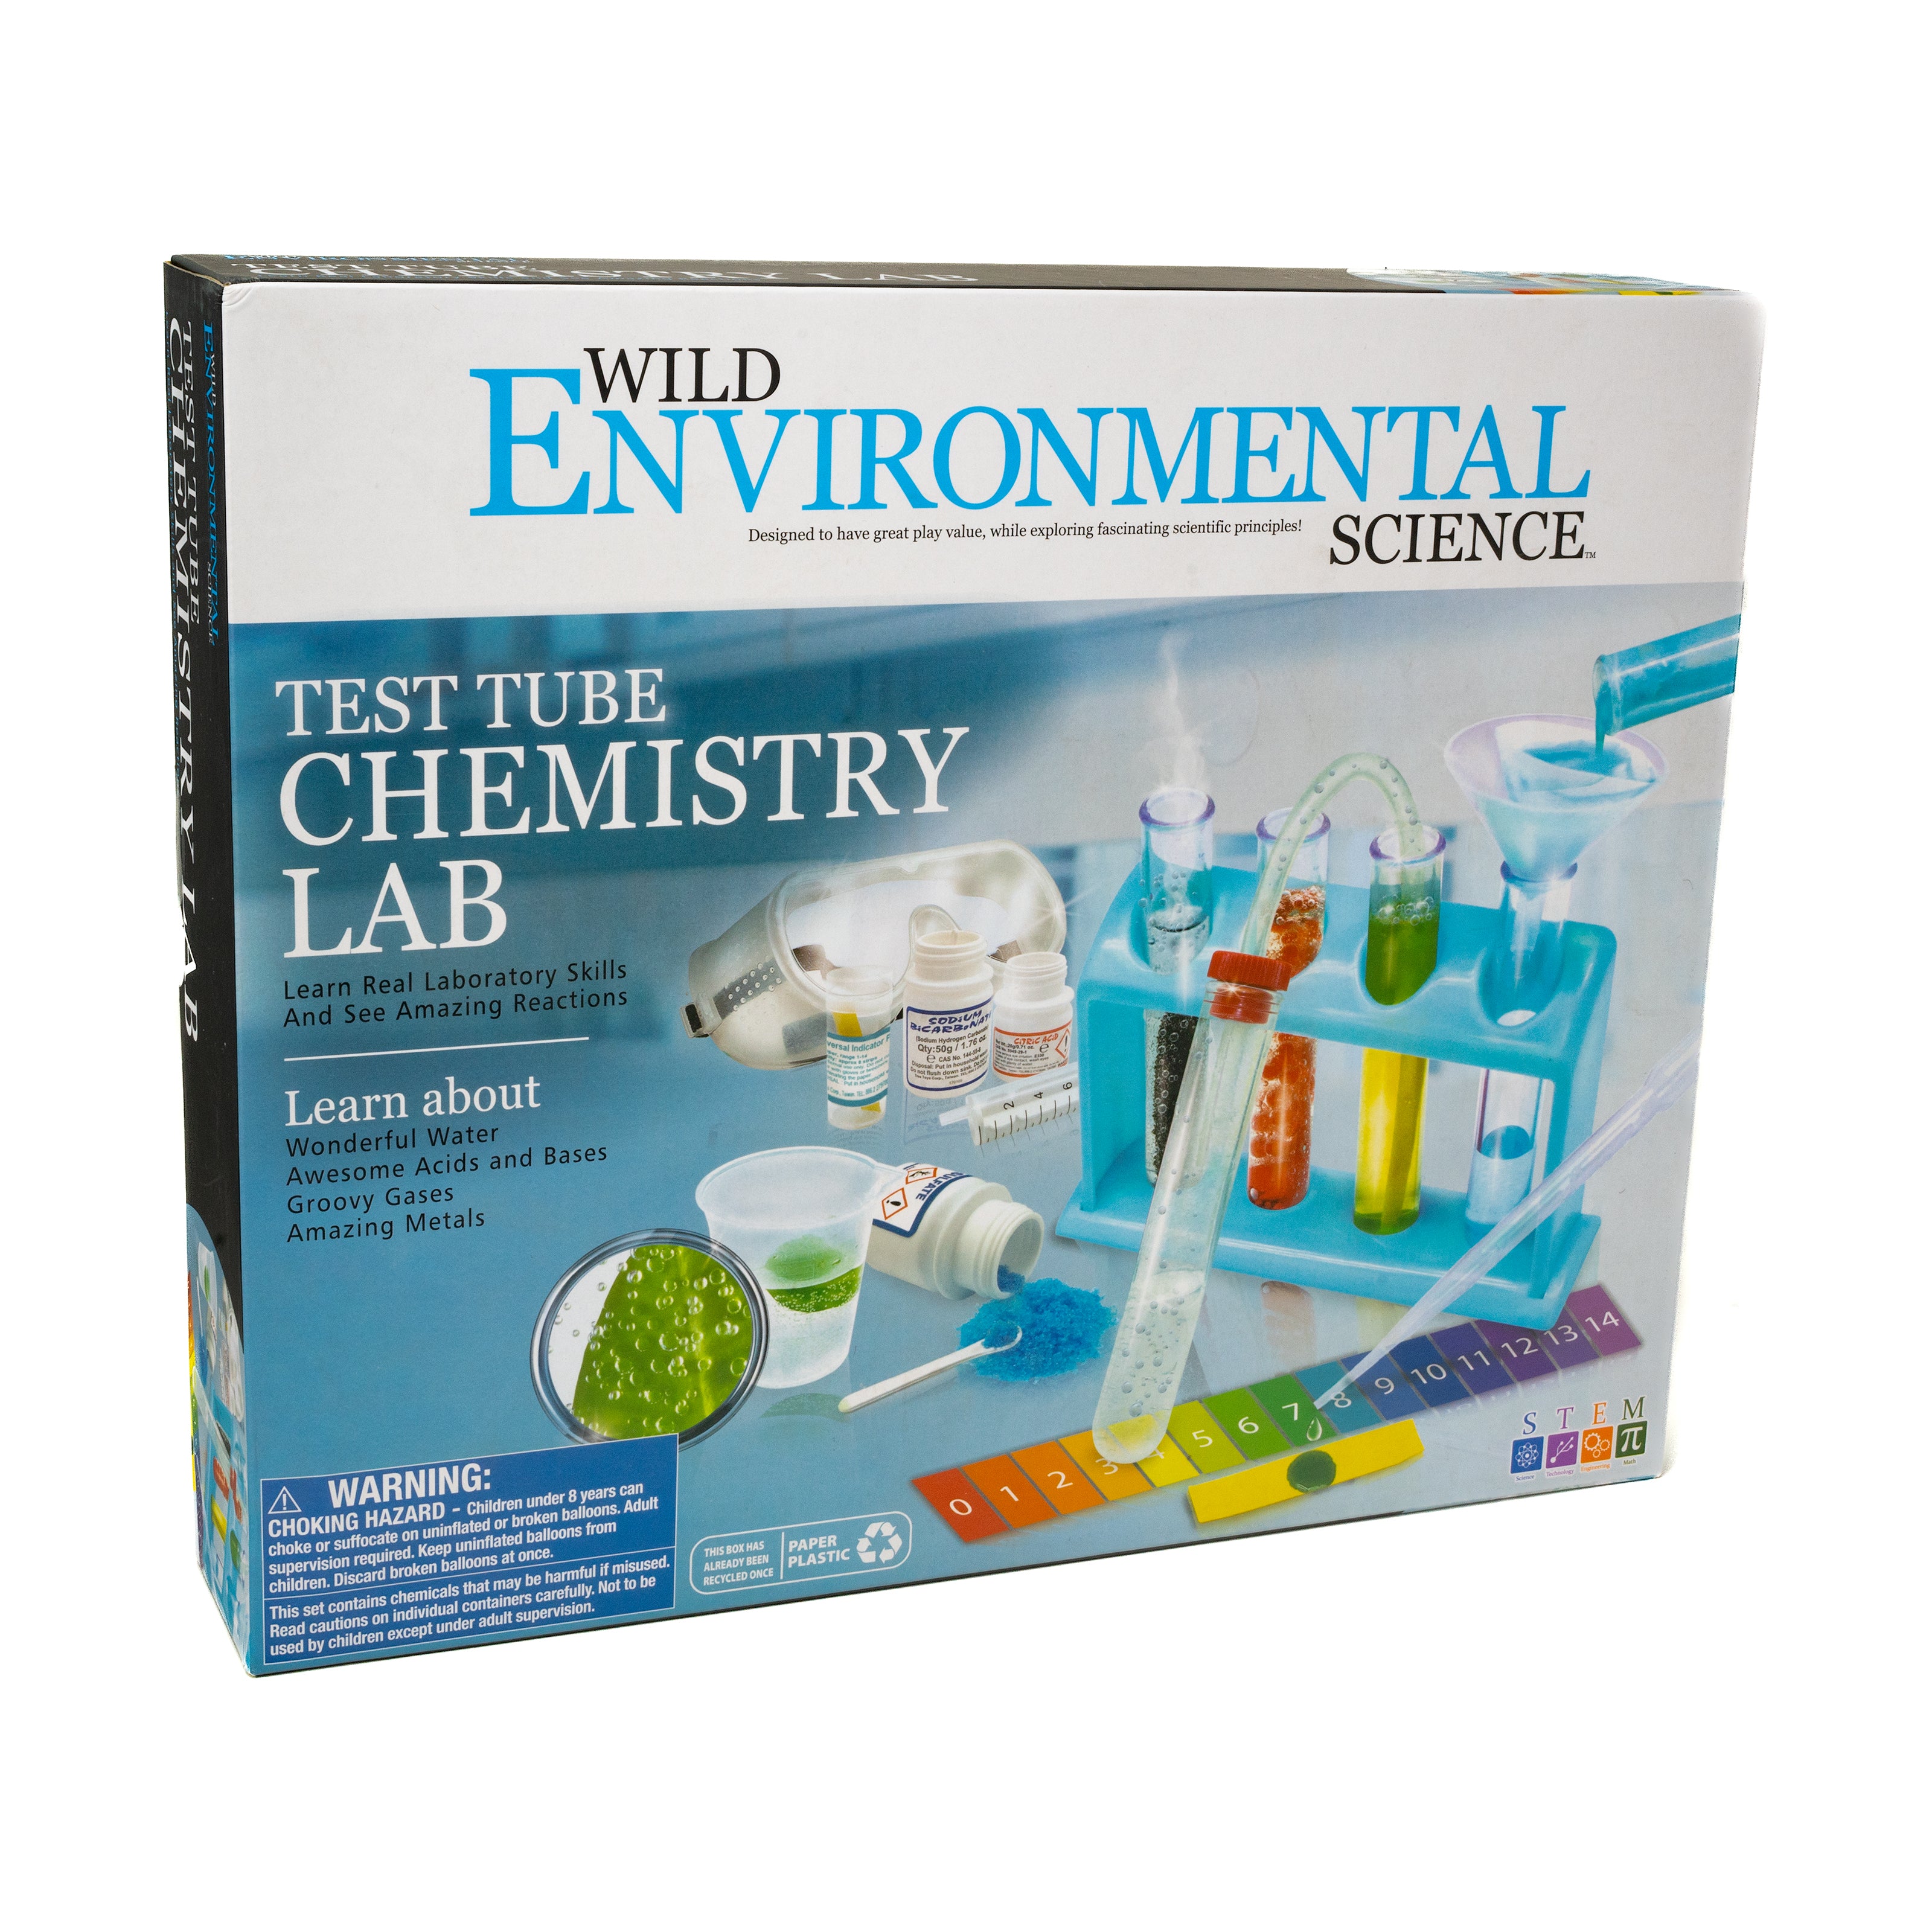  6-in-1 Science Kit for Kids - Chemistry Experiments